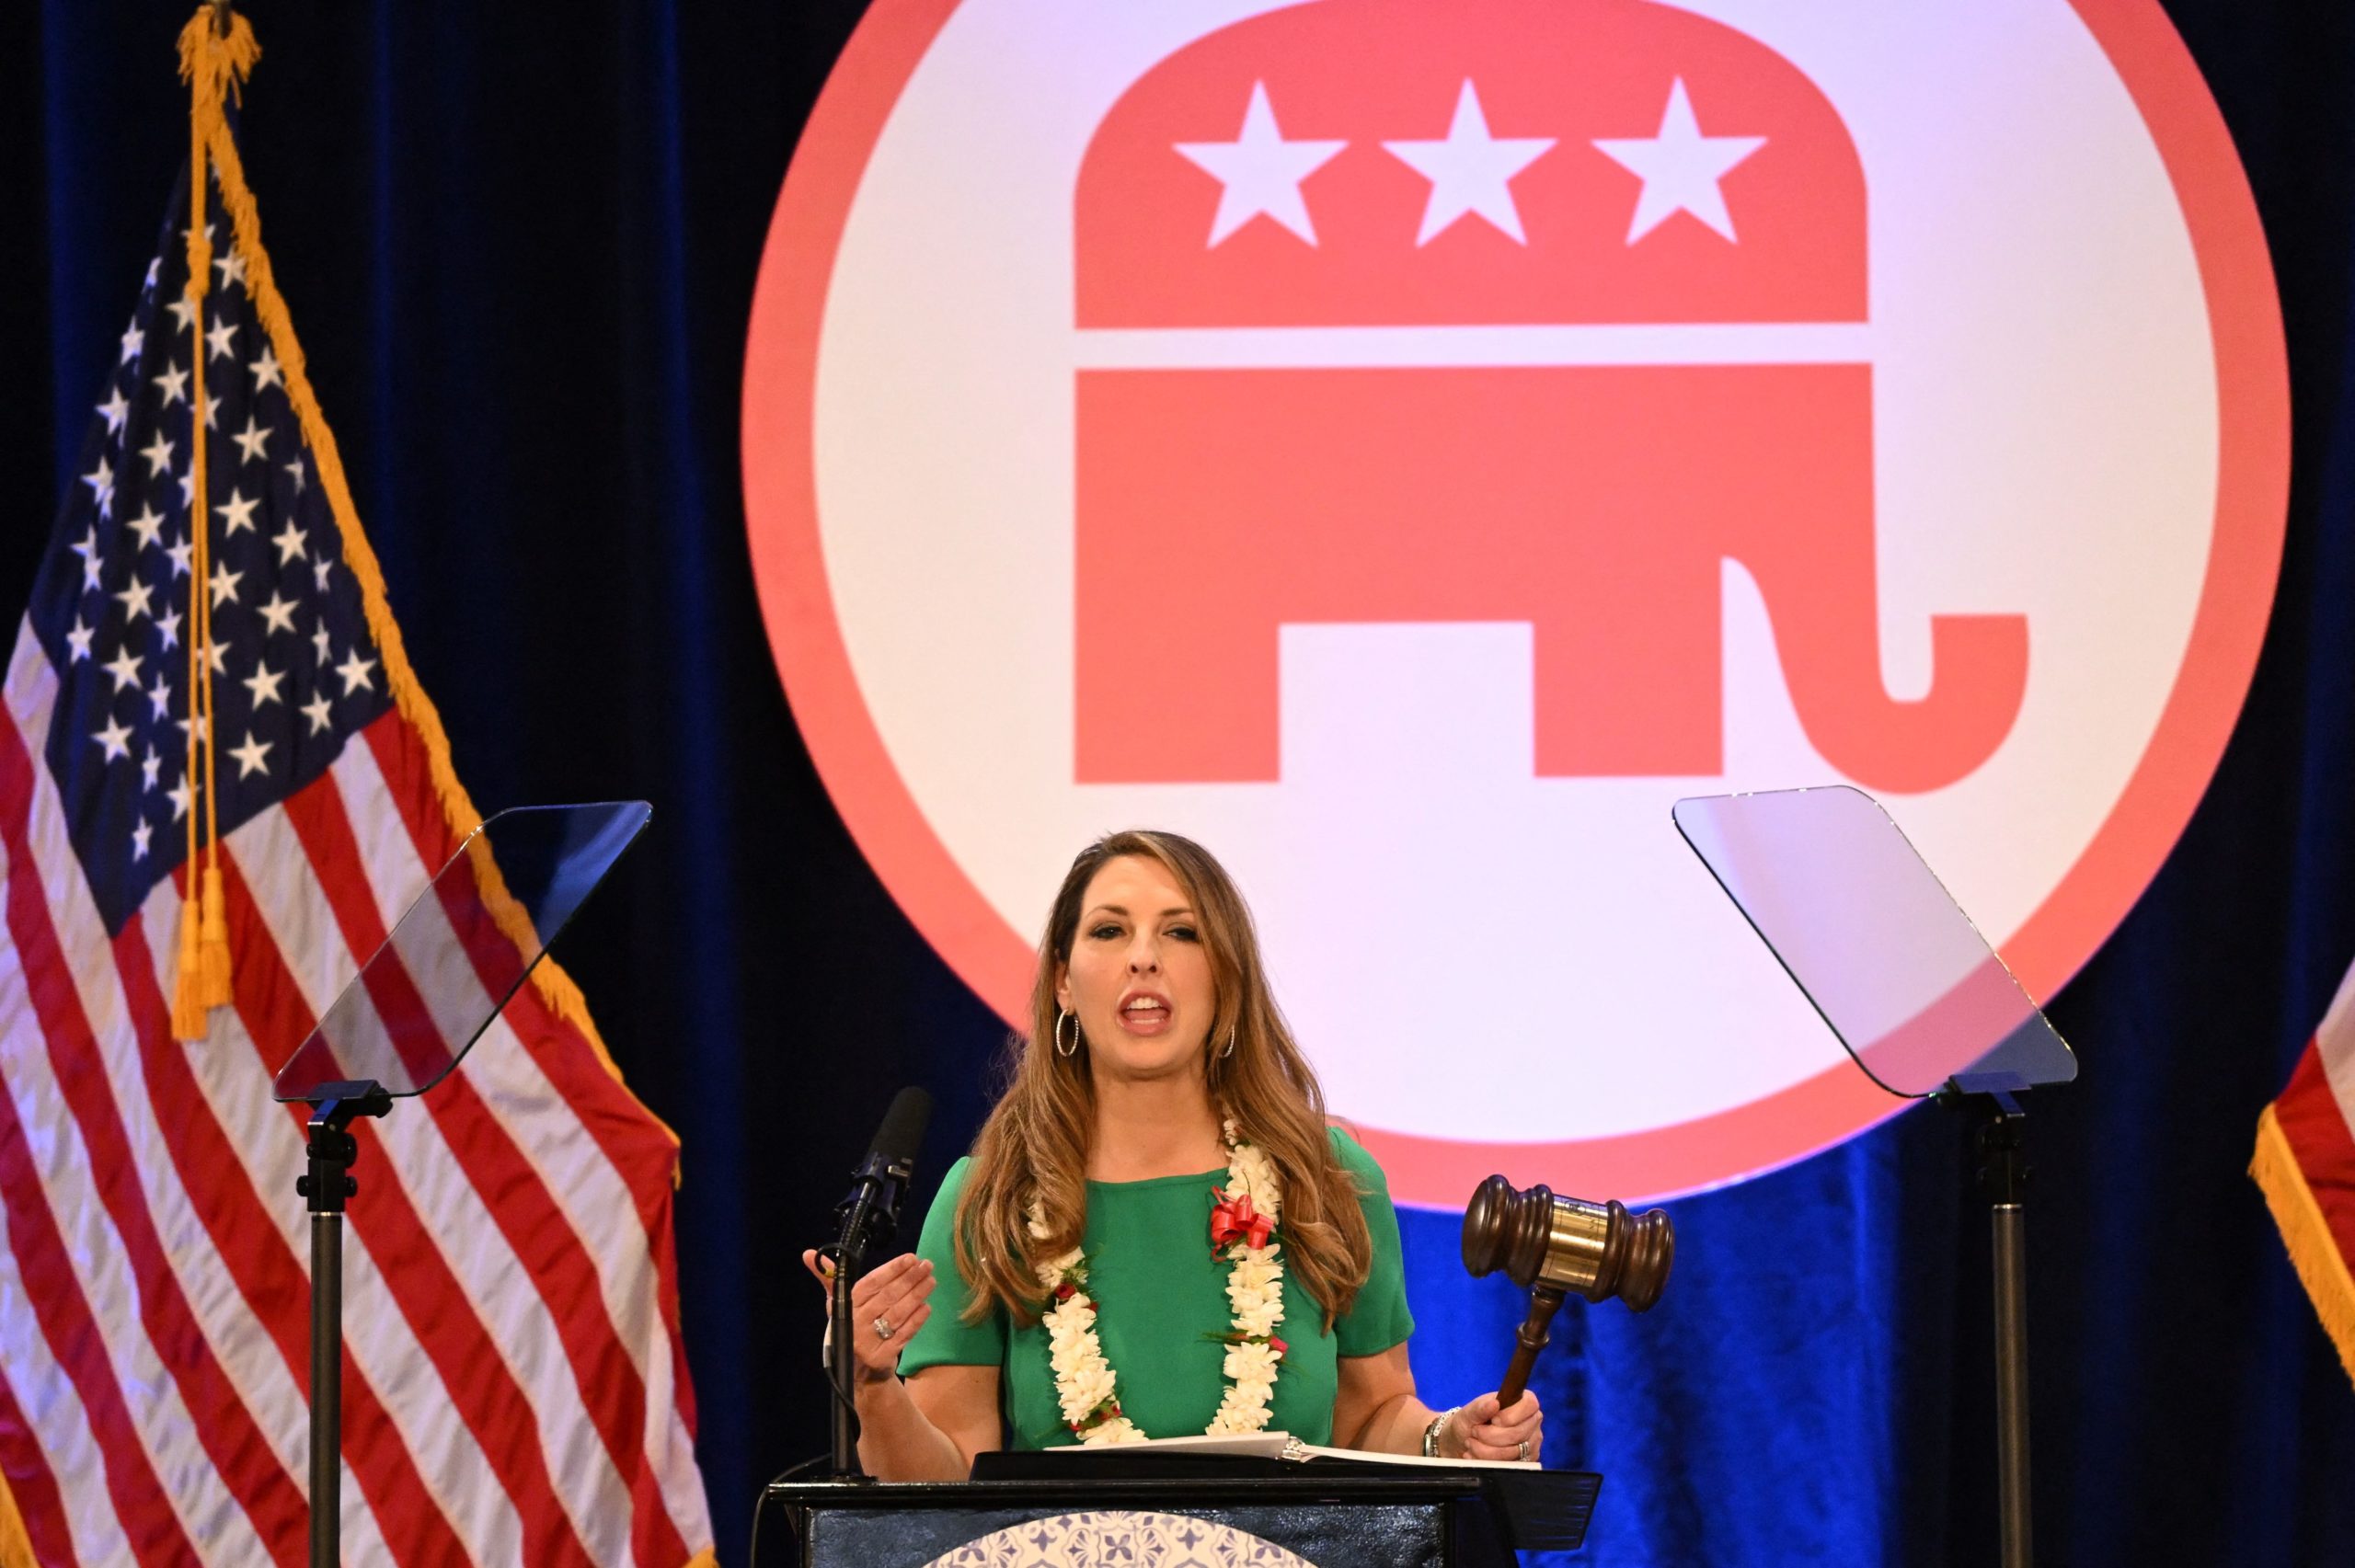 Republican Party chair Ronna McDaniel speaks after being re-elected during the 2023 Republican National Committee Winter Meeting in Dana Point, California, on January 27, 2023. (Photo by Patrick T. Fallon / AFP) (Photo by PATRICK T. FALLON/AFP via Getty Images)